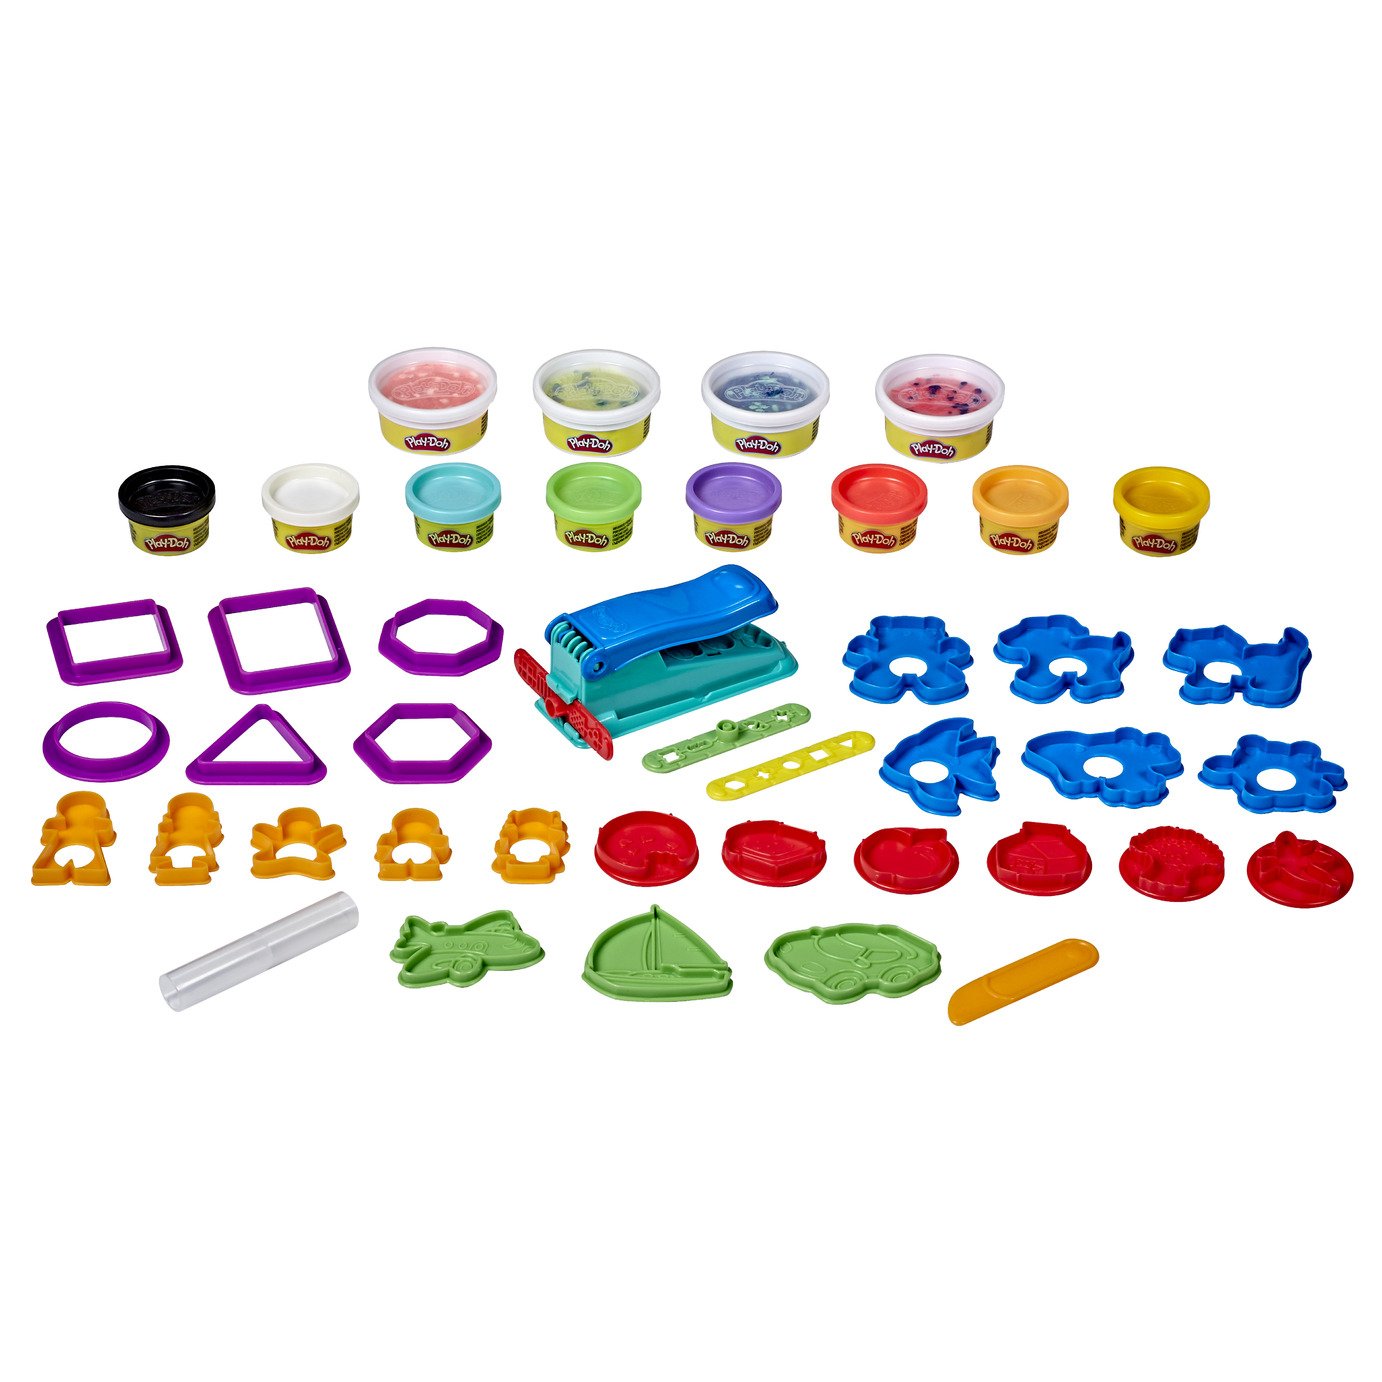 Play-Doh Tools and Colour Party Arts and Crafts Activity Set Review